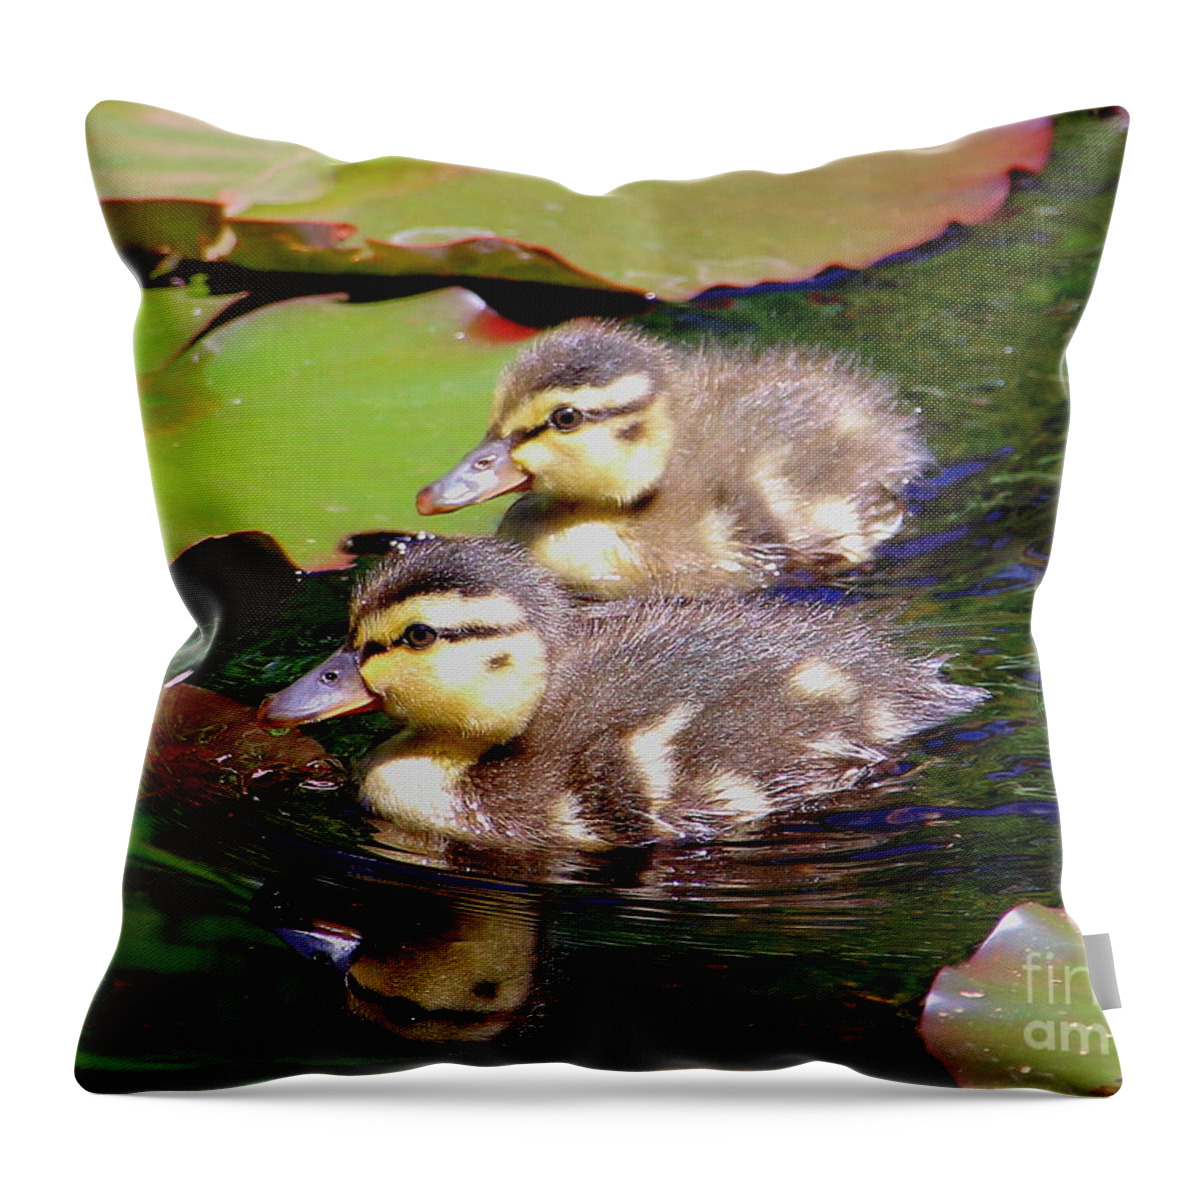 Ducklings Throw Pillow featuring the photograph Two Ducklings by Amanda Mohler